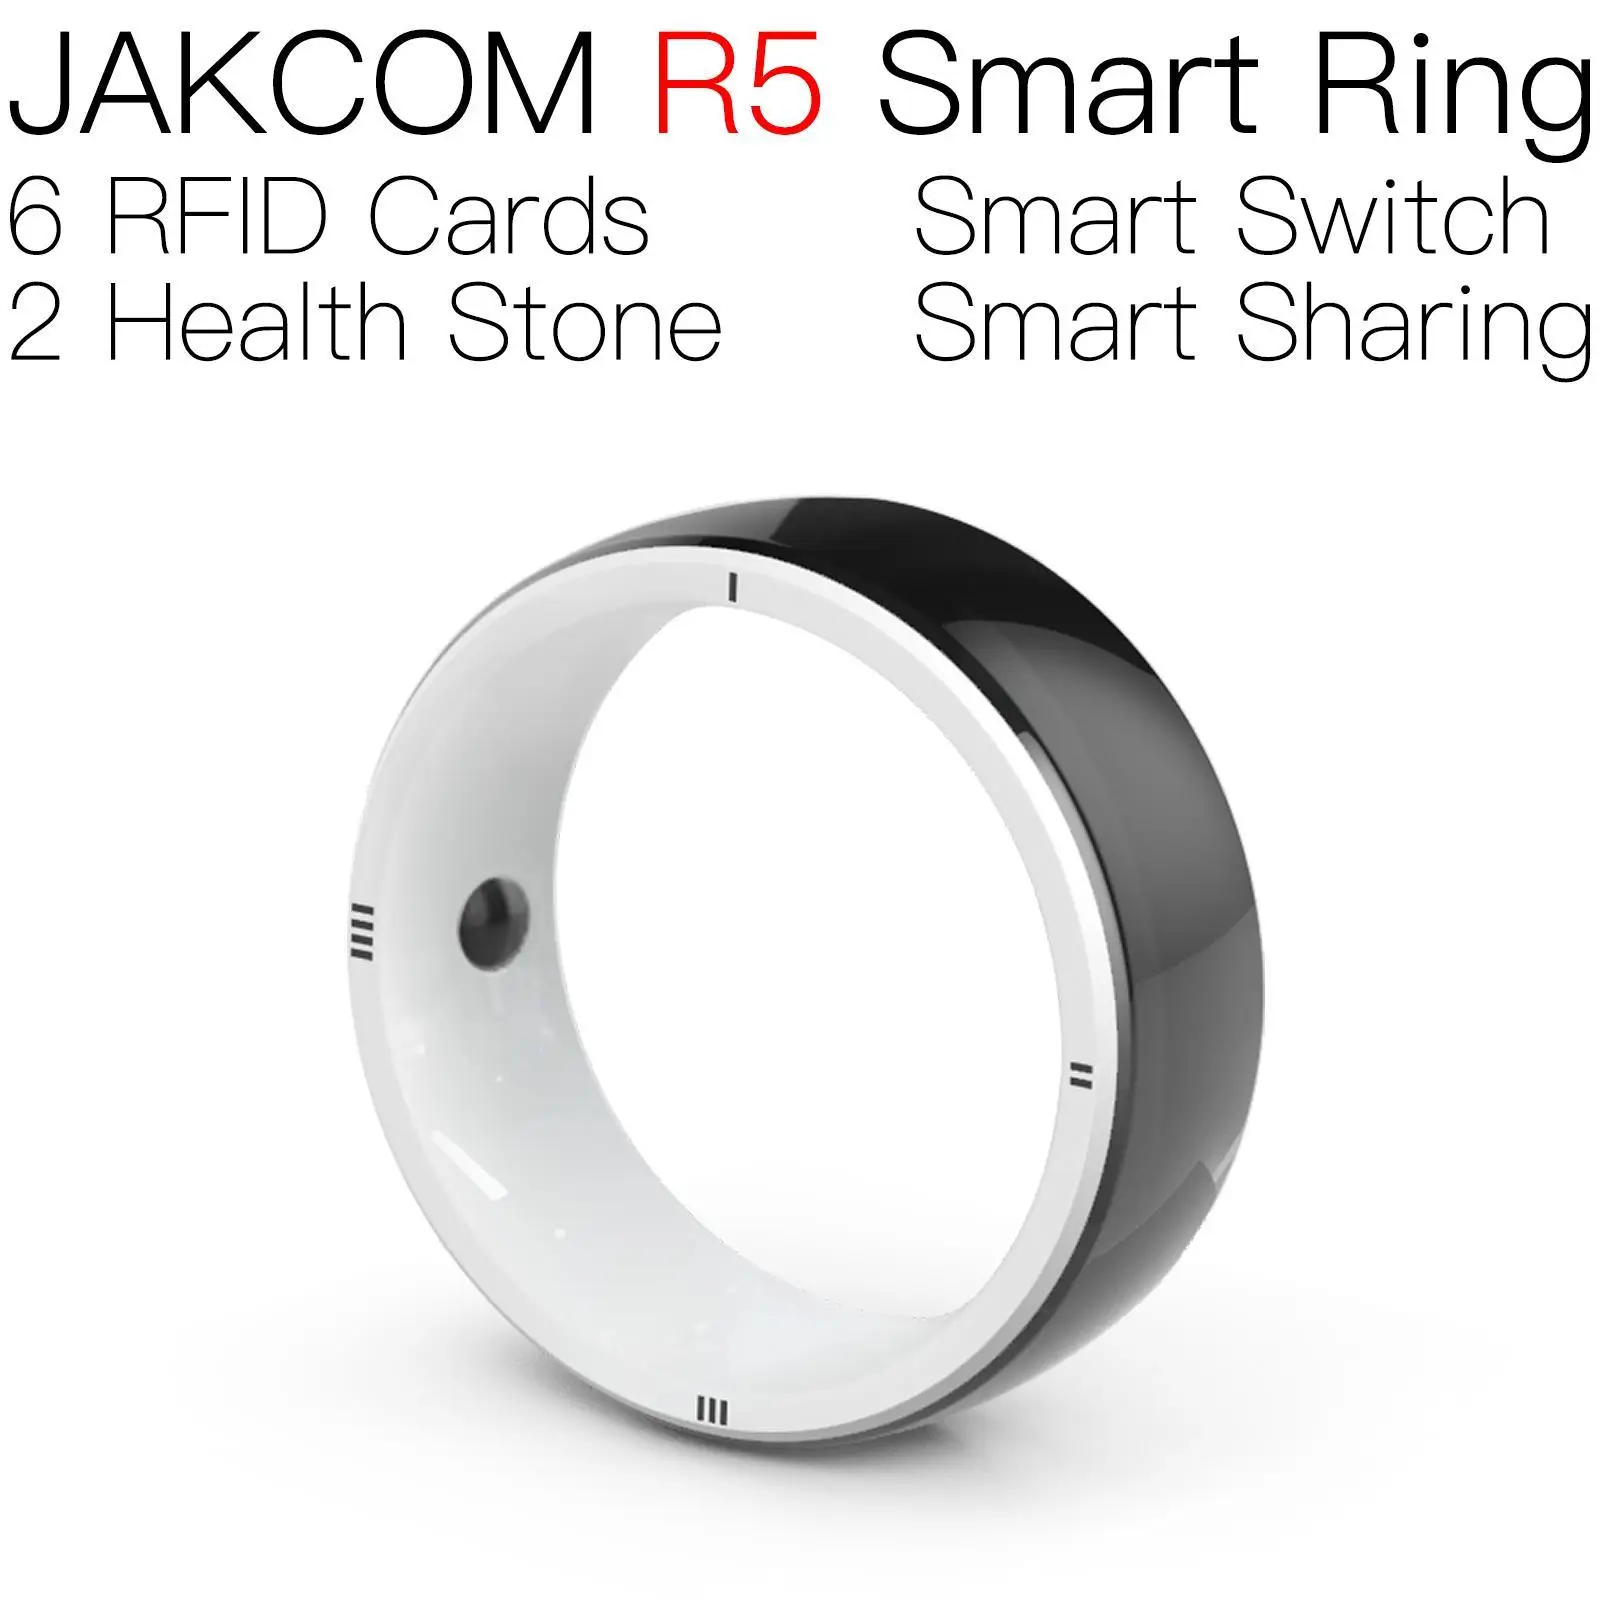 

JAKCOM R5 Smart Ring Match to laundry nfc ntag216 lot carte rfid 5 in 1 remote inkjet pvc chip uhf dual hf 125 100 sd card free